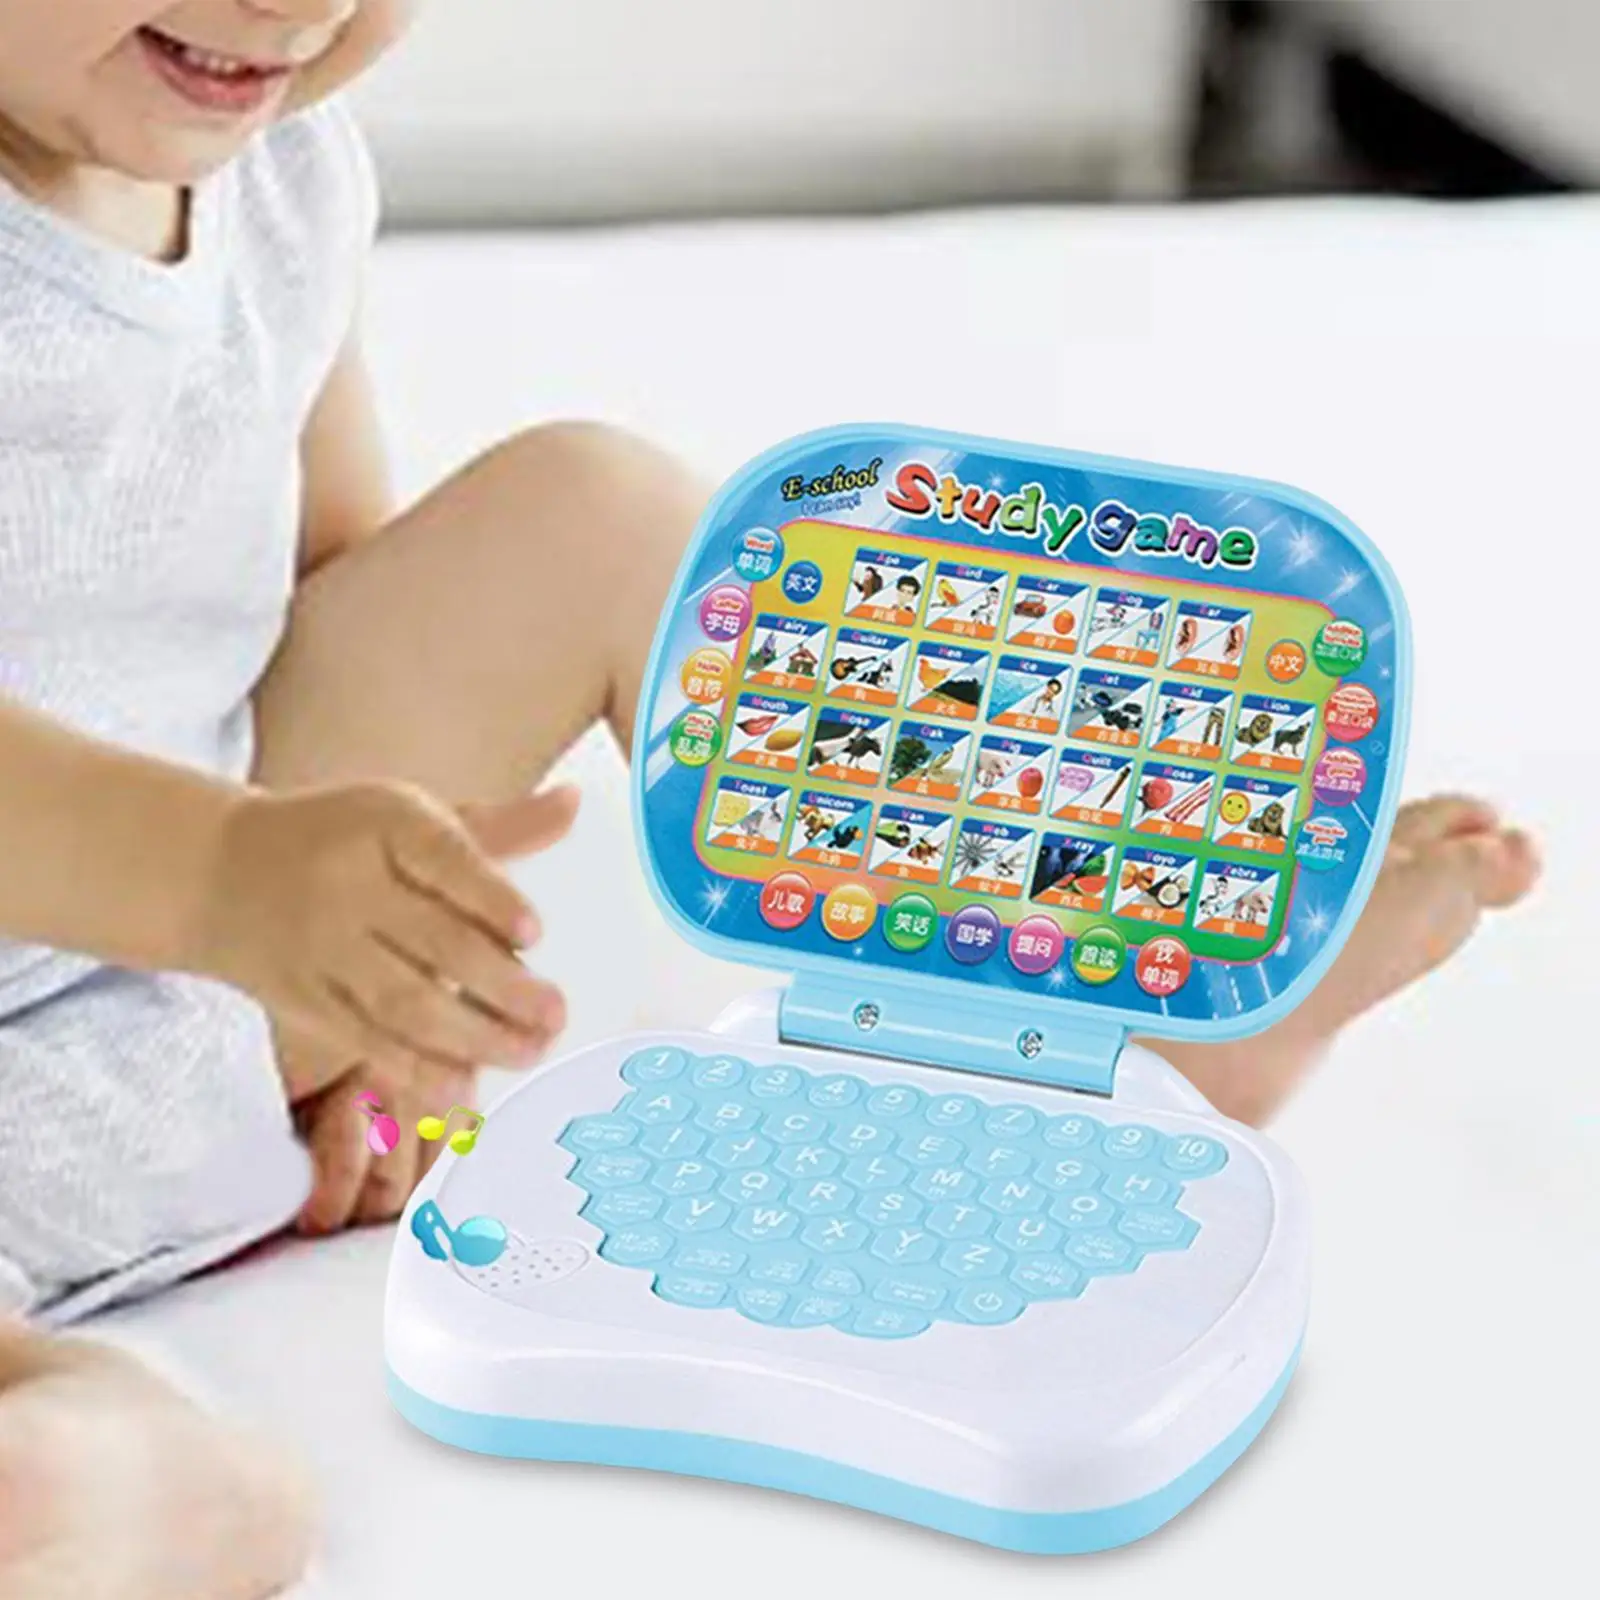 Multifunction Handheld Language Learning Machine Study Game Computer Child Interactive Learning Pad Tablet for Kids